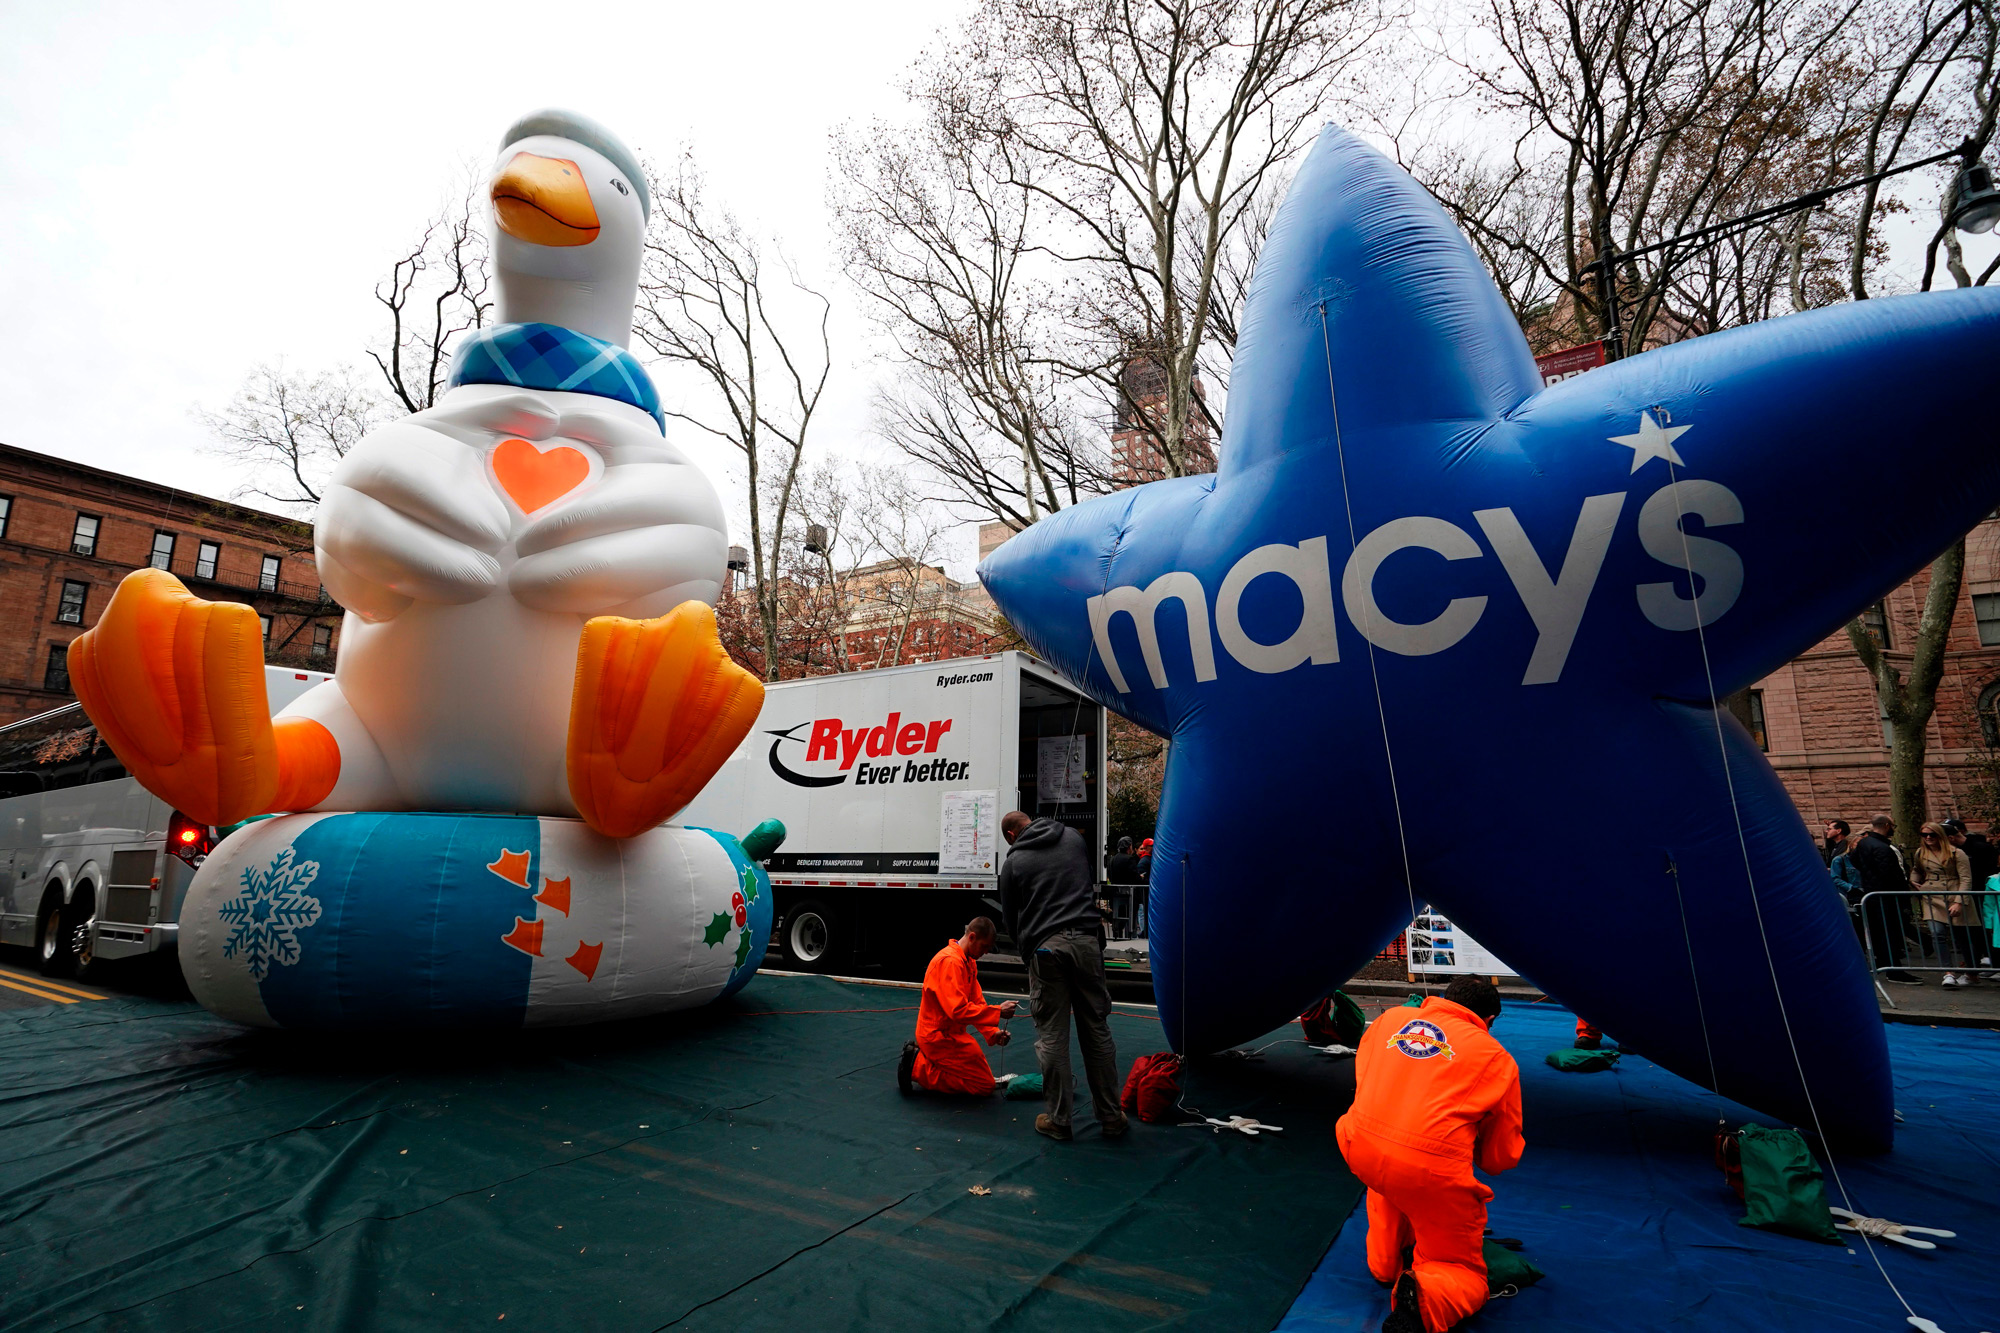 The Aflac Duck and Macys balloon are pictured during the Macy's Thanksgiving Day Parade balloon inflation in New York City on November 27, 2019.